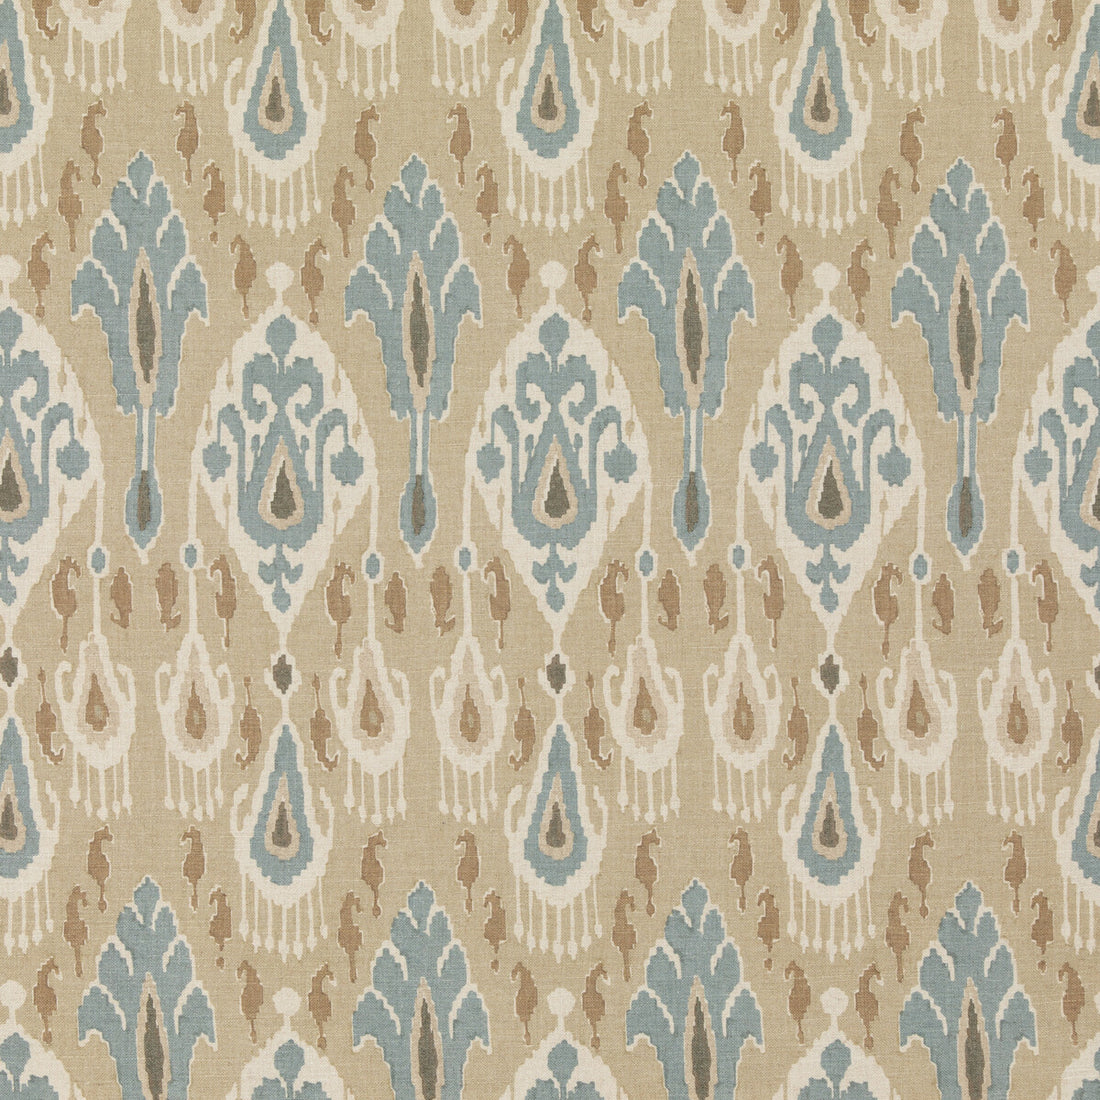 Ikat Bokhara fabric in sand color - pattern BP10853.2.0 - by G P &amp; J Baker in the Chifu collection